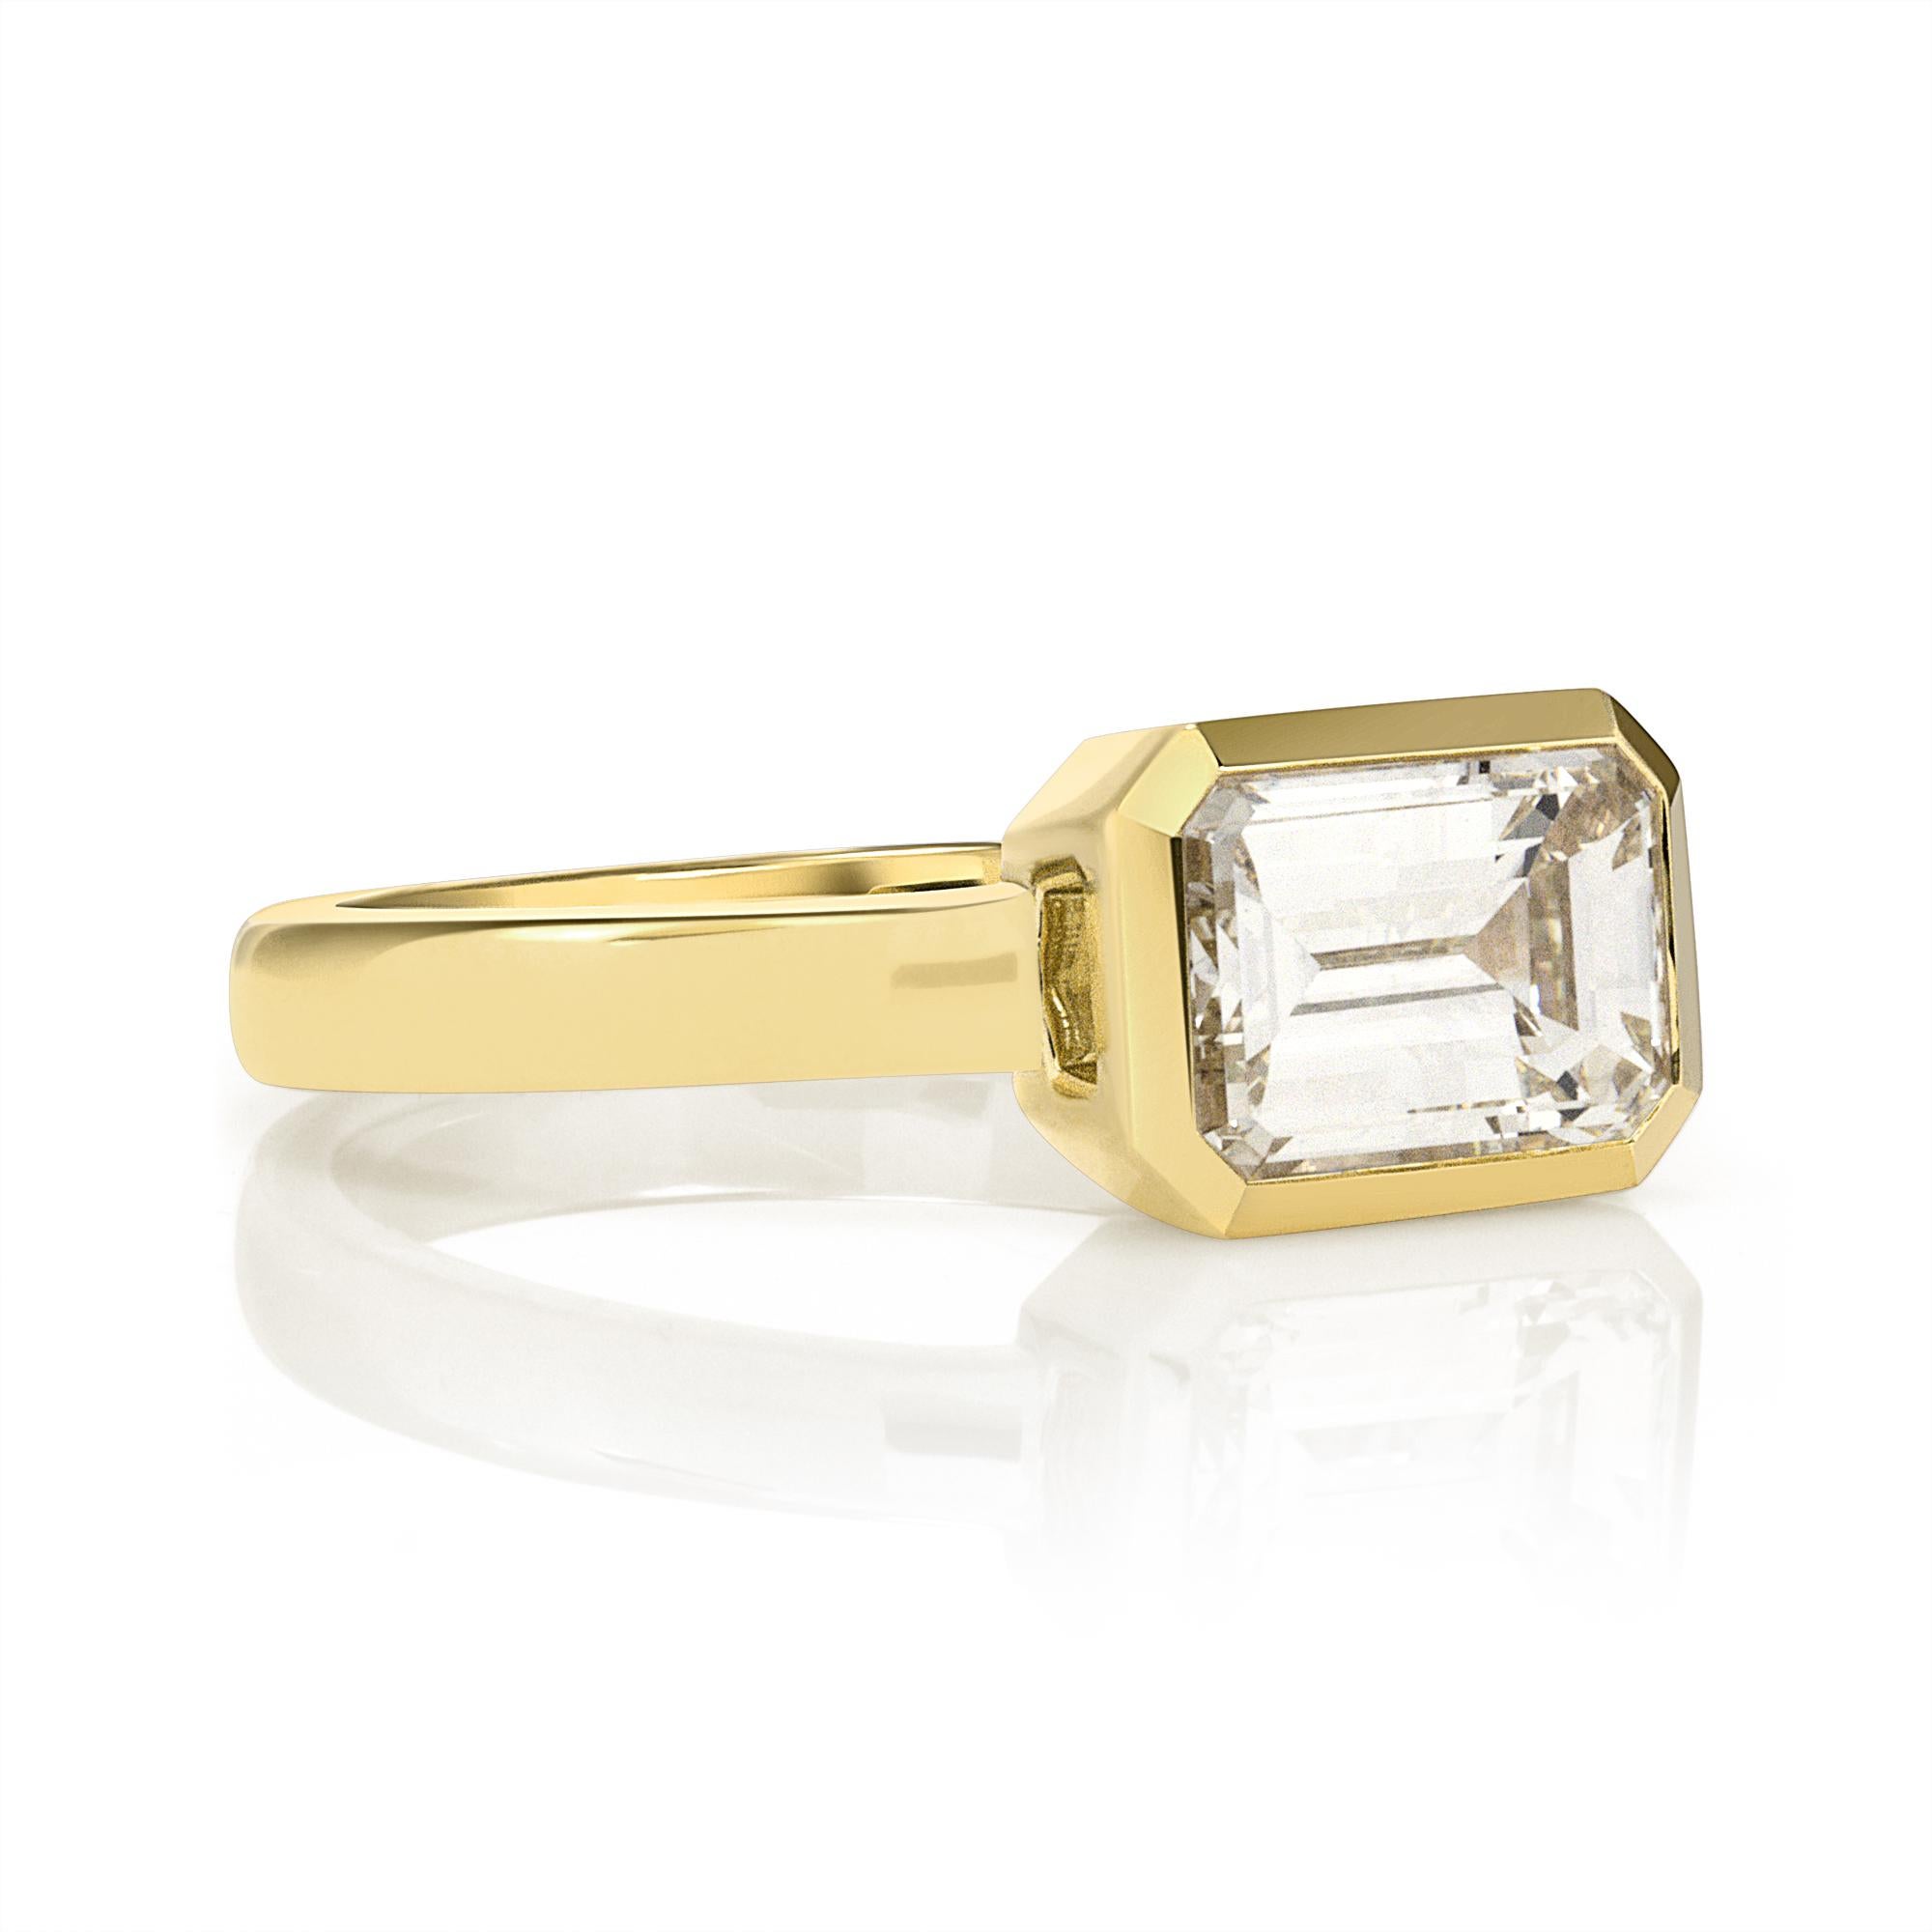 1.50ct M/VS1 GIA certified emerald cut diamond bezel set in a handcrafted 18K yellow gold mounting.